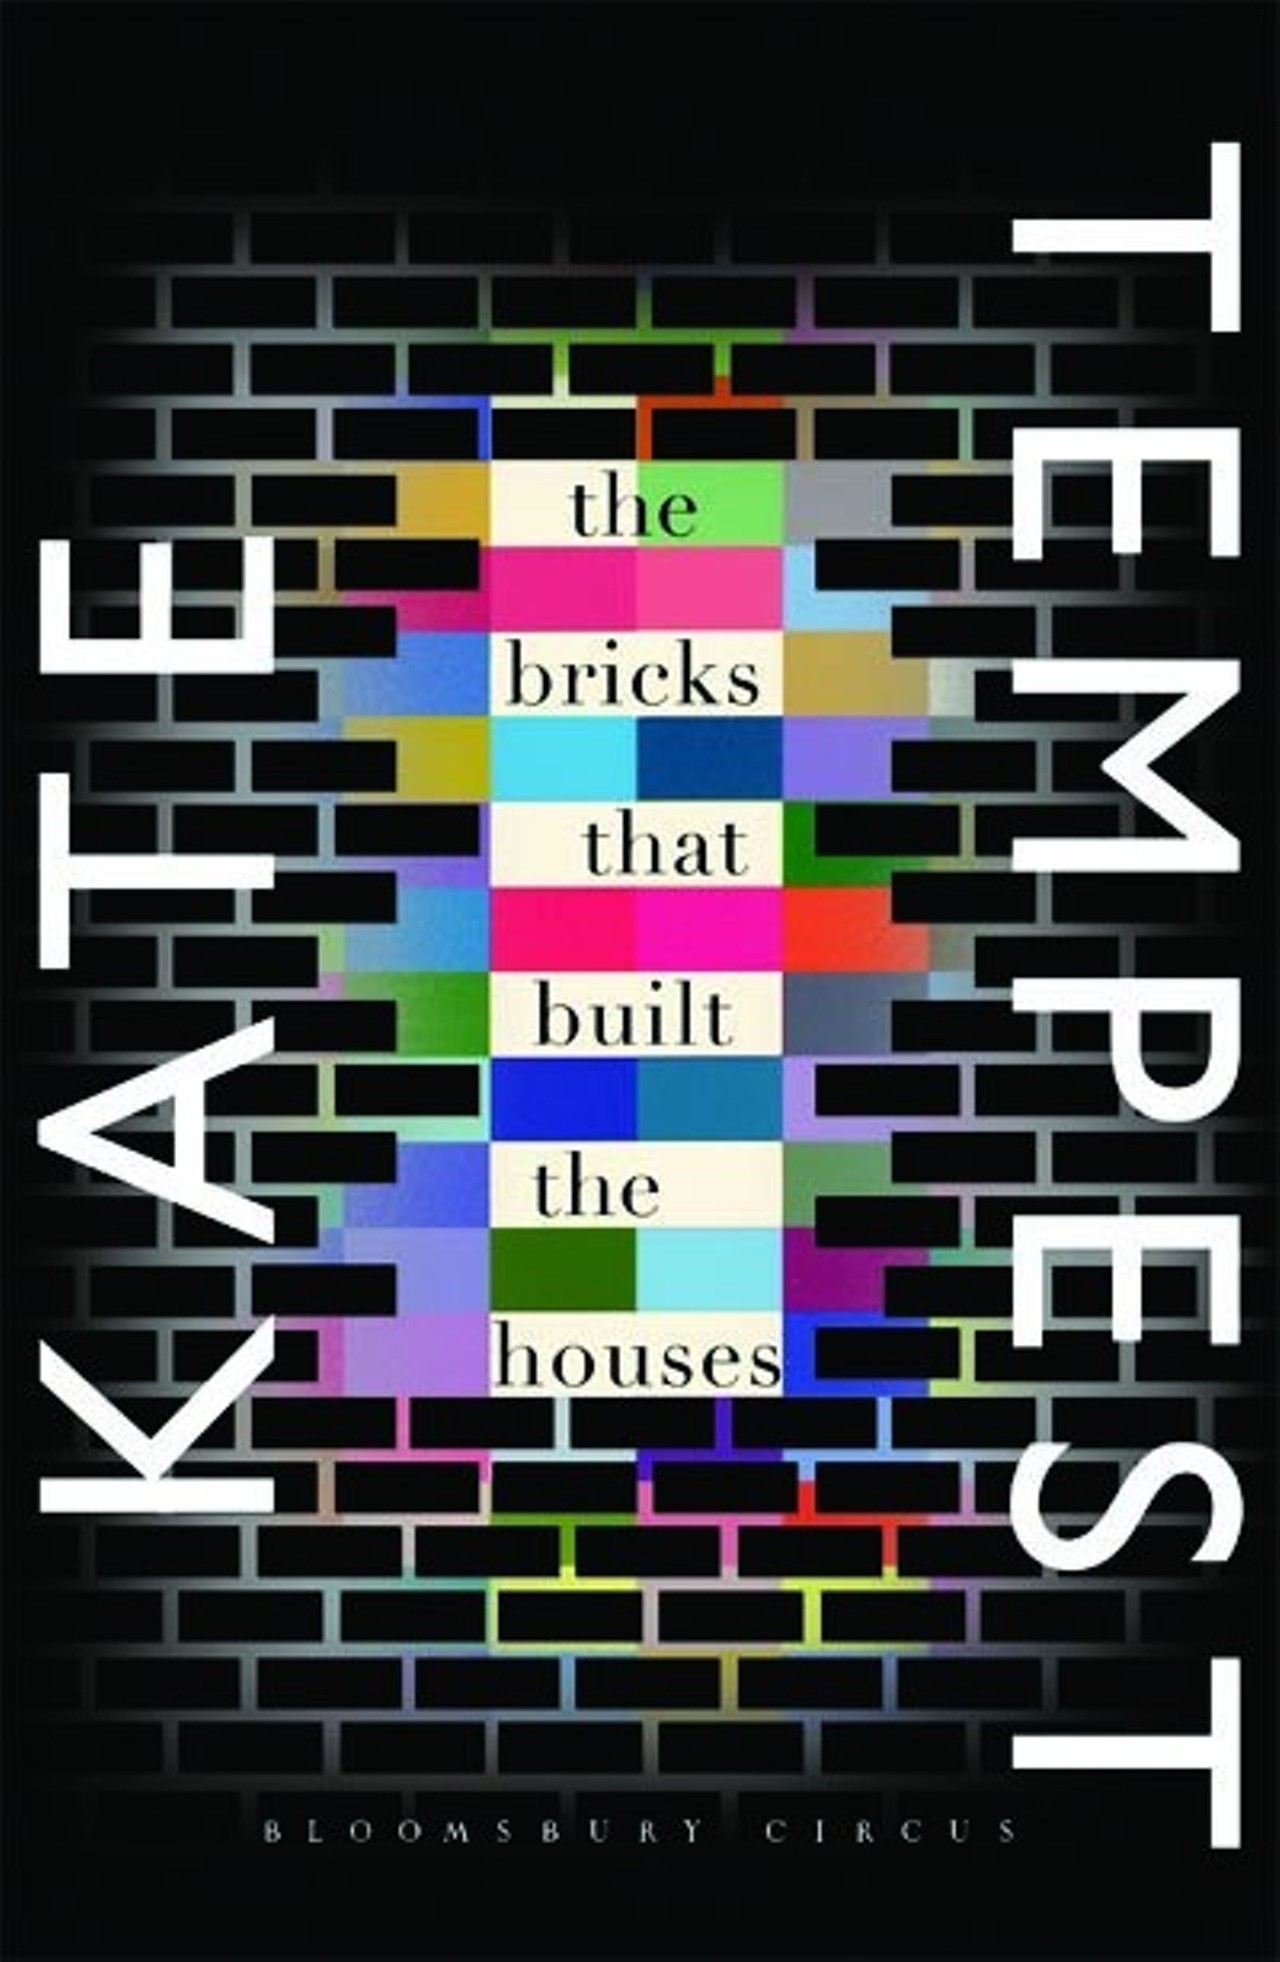 The Bricks That Built The Houses by Kate Tempest -
Kate Tempest, best known in the U.K. as a hip-hop artist, spoken word poet and playwright, broke onto the literary scene this year with this energetic and chaotic debut, her first work of fiction. Her background in poetry and hip-hop are on display through her prose, but also through the gritty realism of how she depicts urban life in England via an interweaving love story about three friends on the run from past mistakes and drug deals gone wrong.